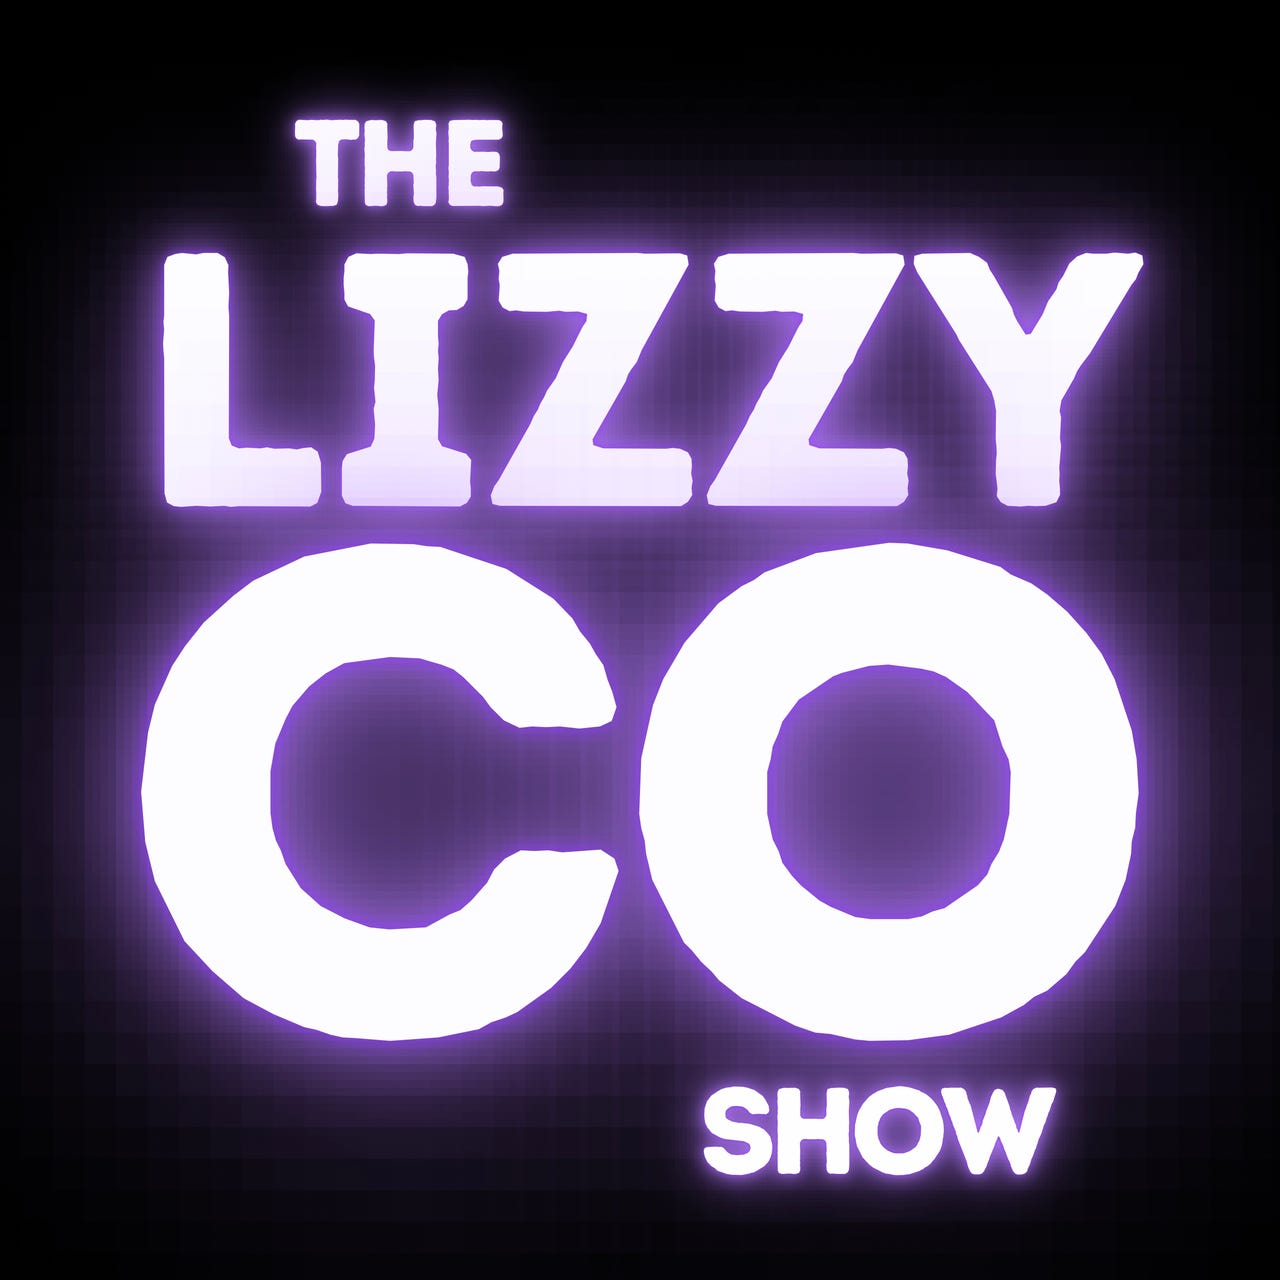 Artwork for The Lizzy Co Show